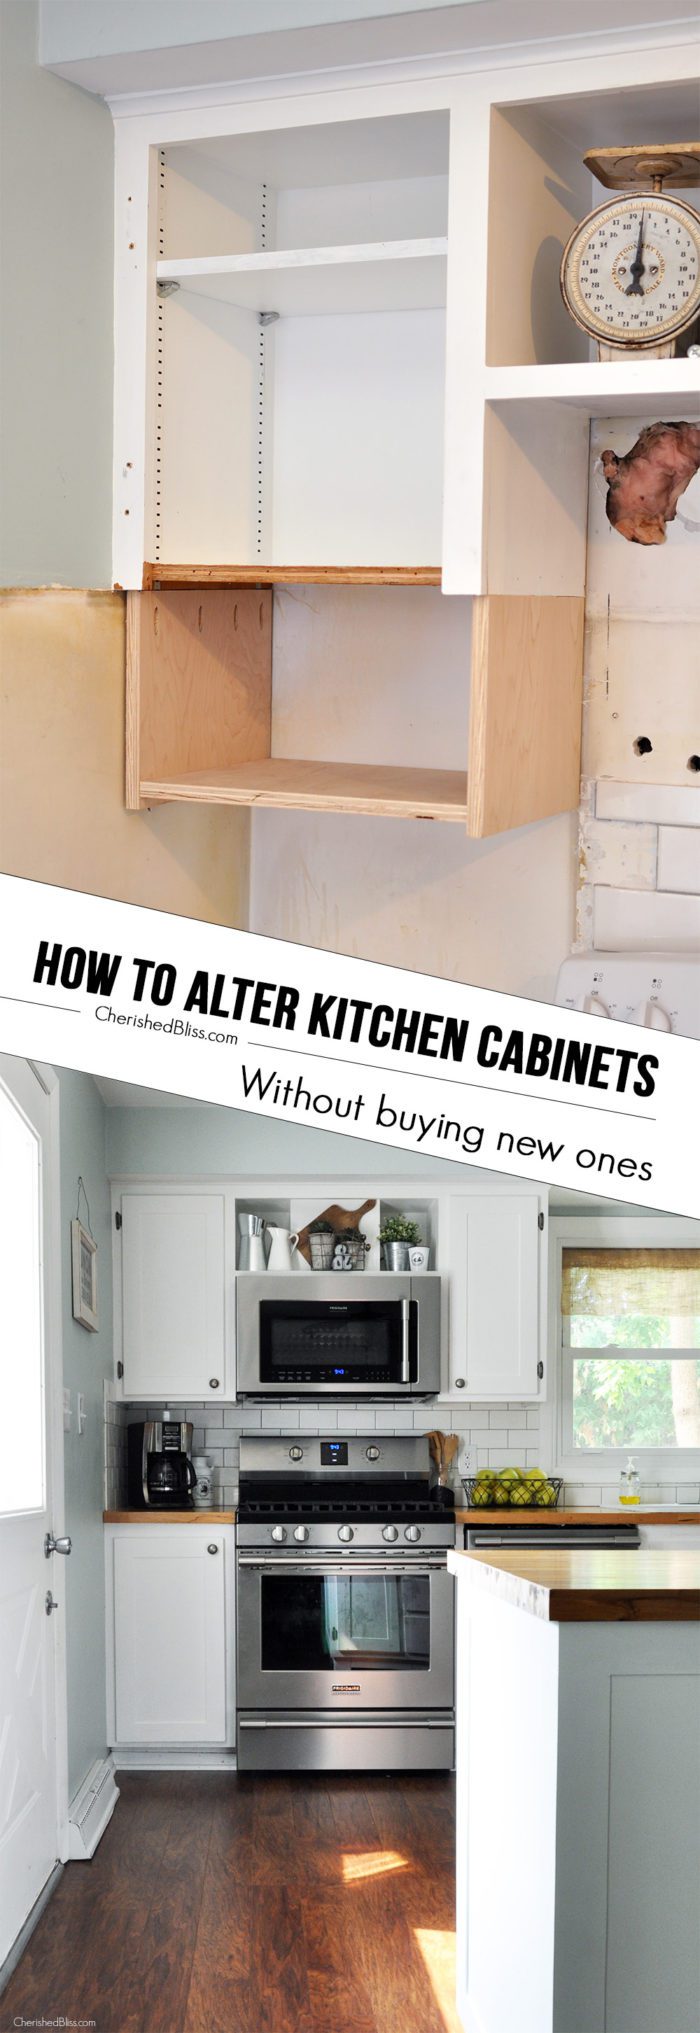 How to Alter Kitchen Cabinets